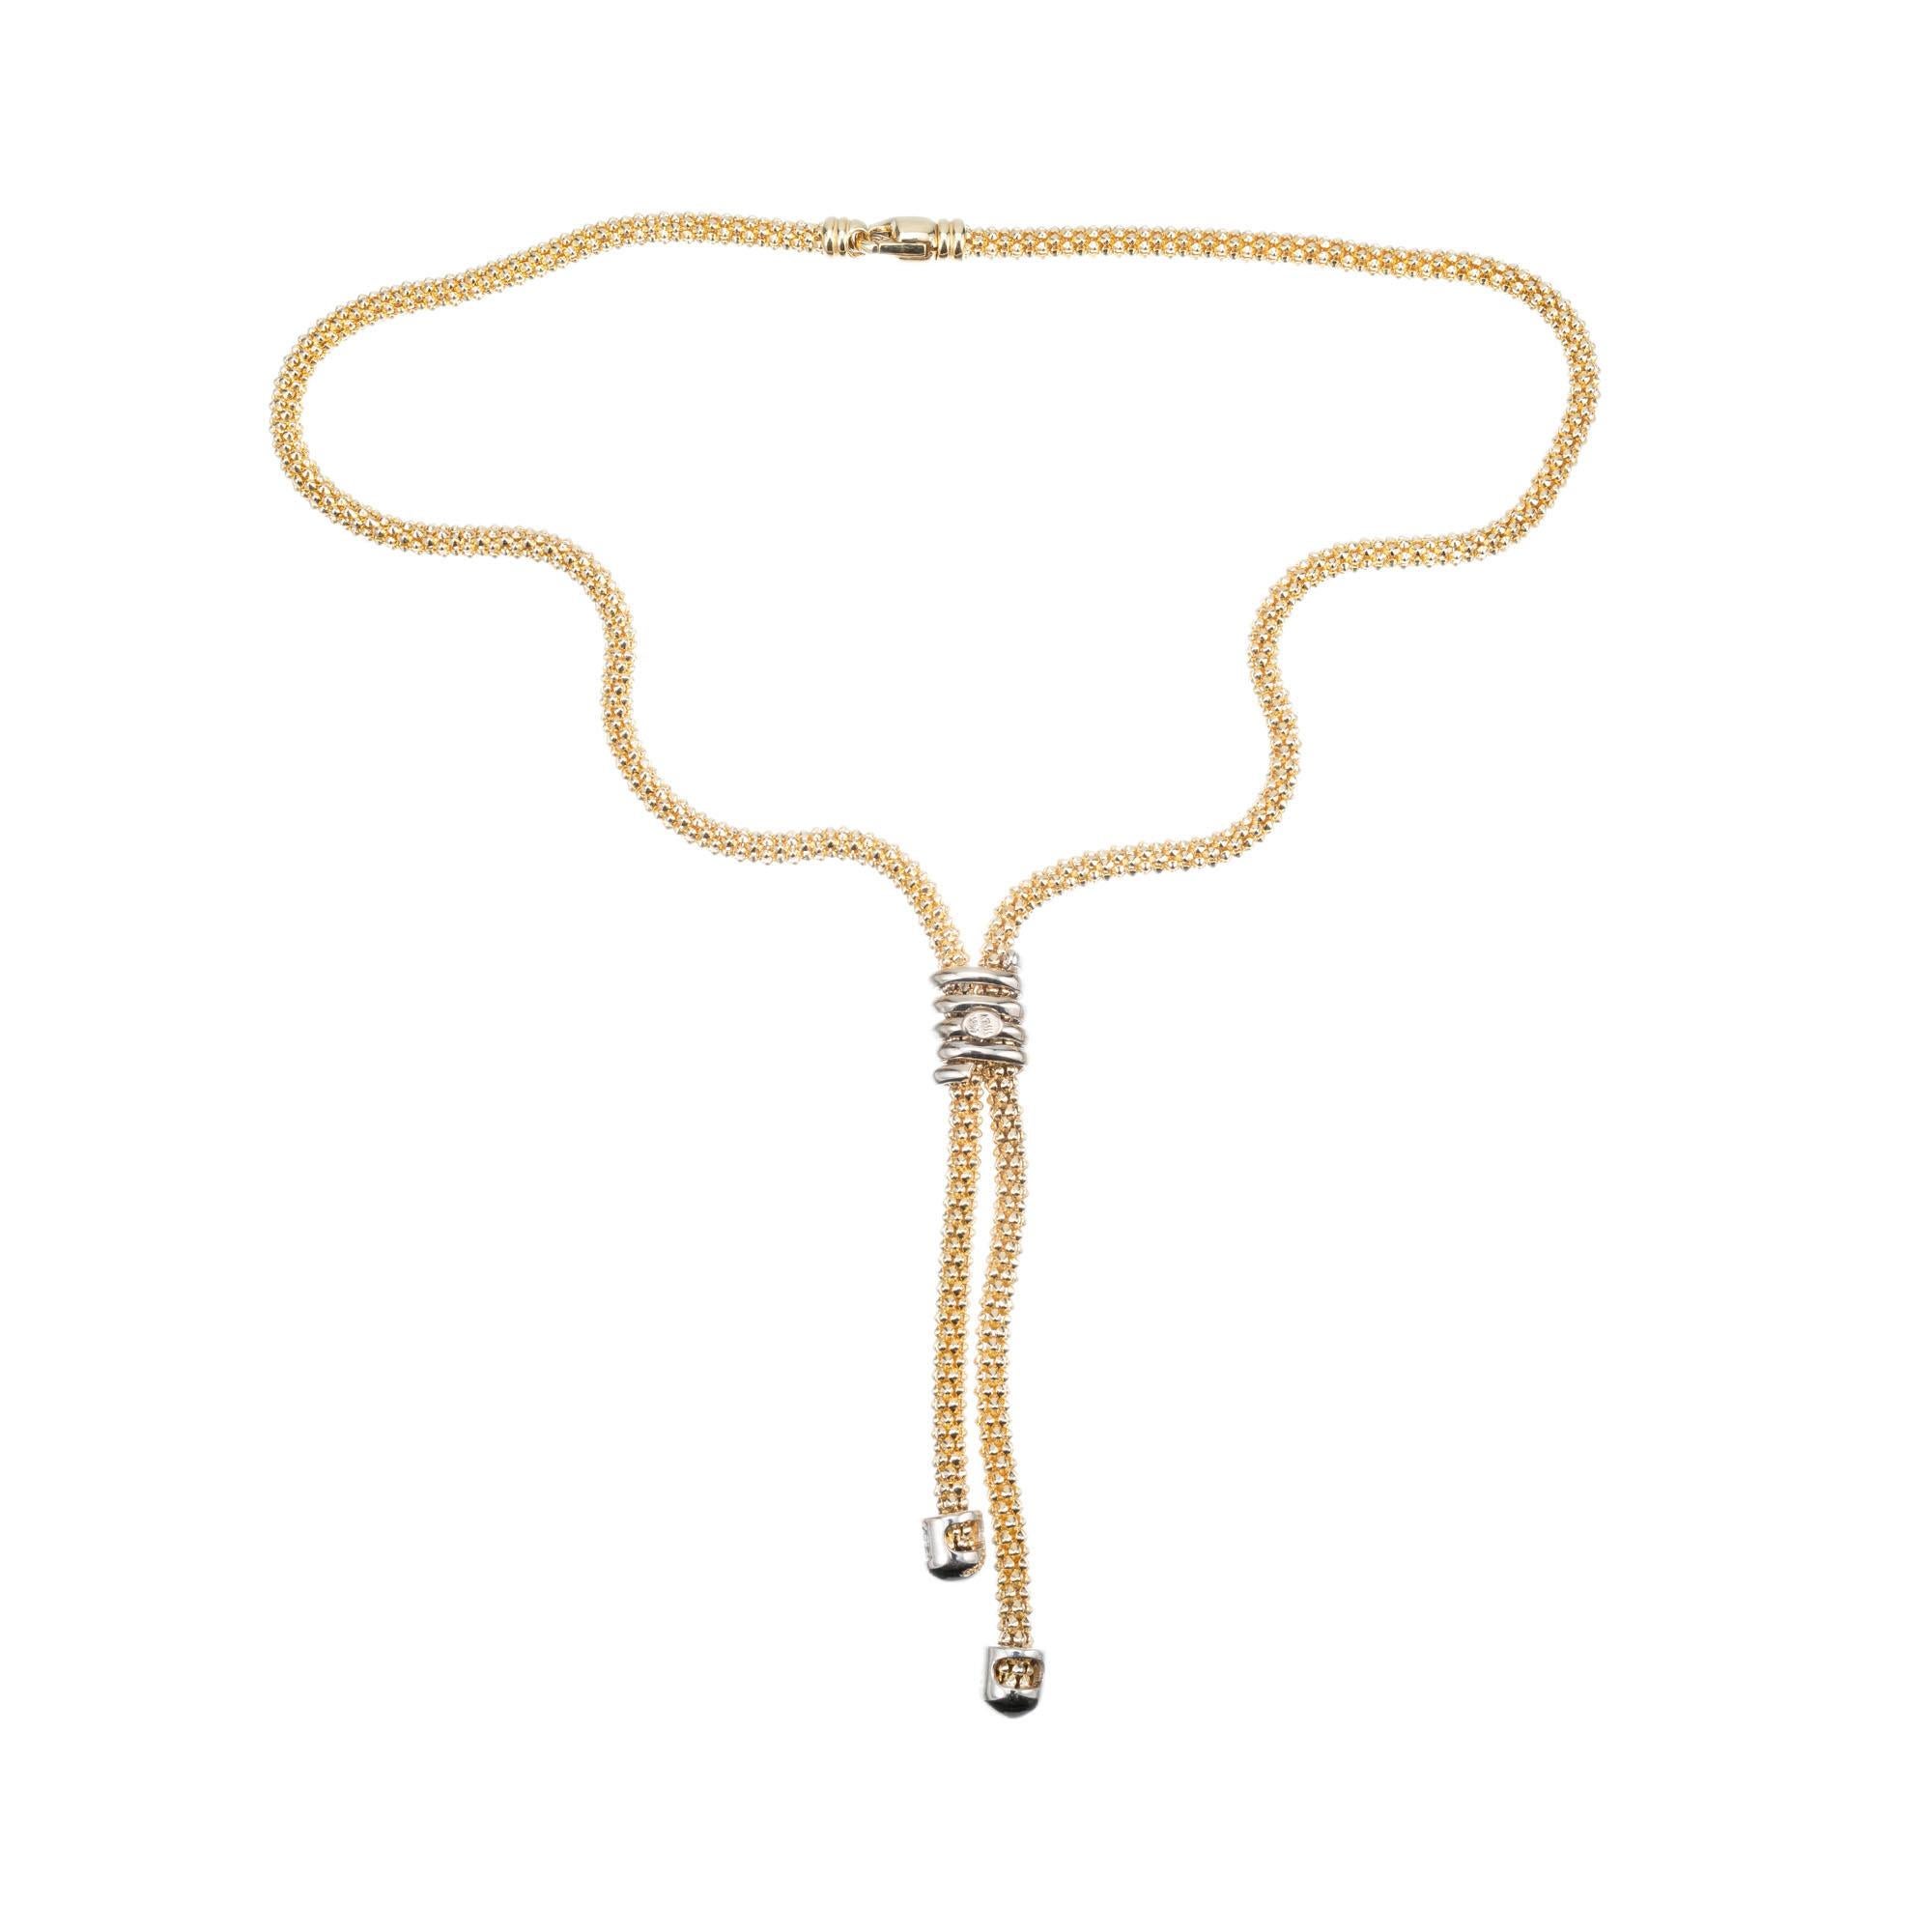 1980’s lariat style necklace in 14k yellow and white gold with .62 carat of diamond accents. Lobster catch. 18 inches in length. 

37 round diamonds, H-J SI approx. .62cts
14k yellow gold 
14k white gold 
Stamped: 14k
37.3 grams
Top to bottom: